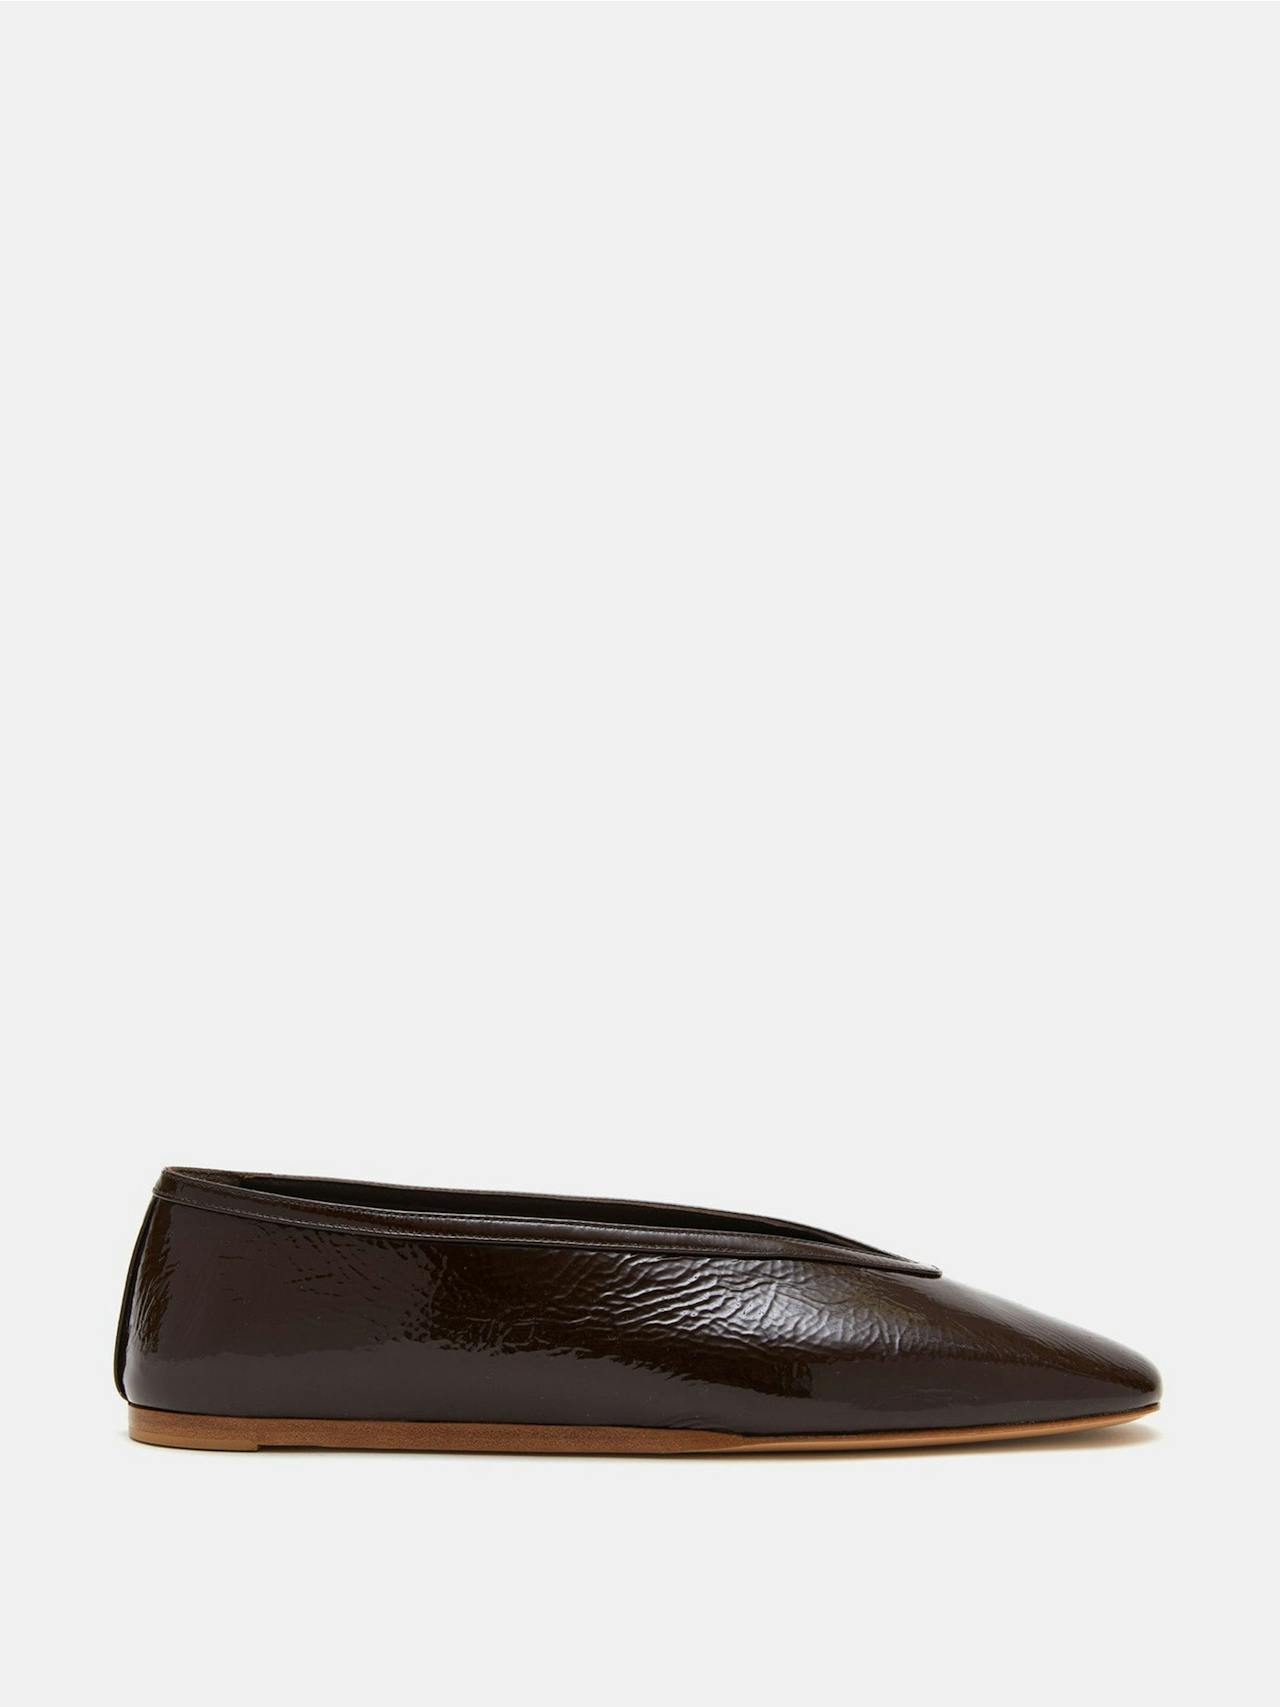 Chocolate patent leather Luna slippers